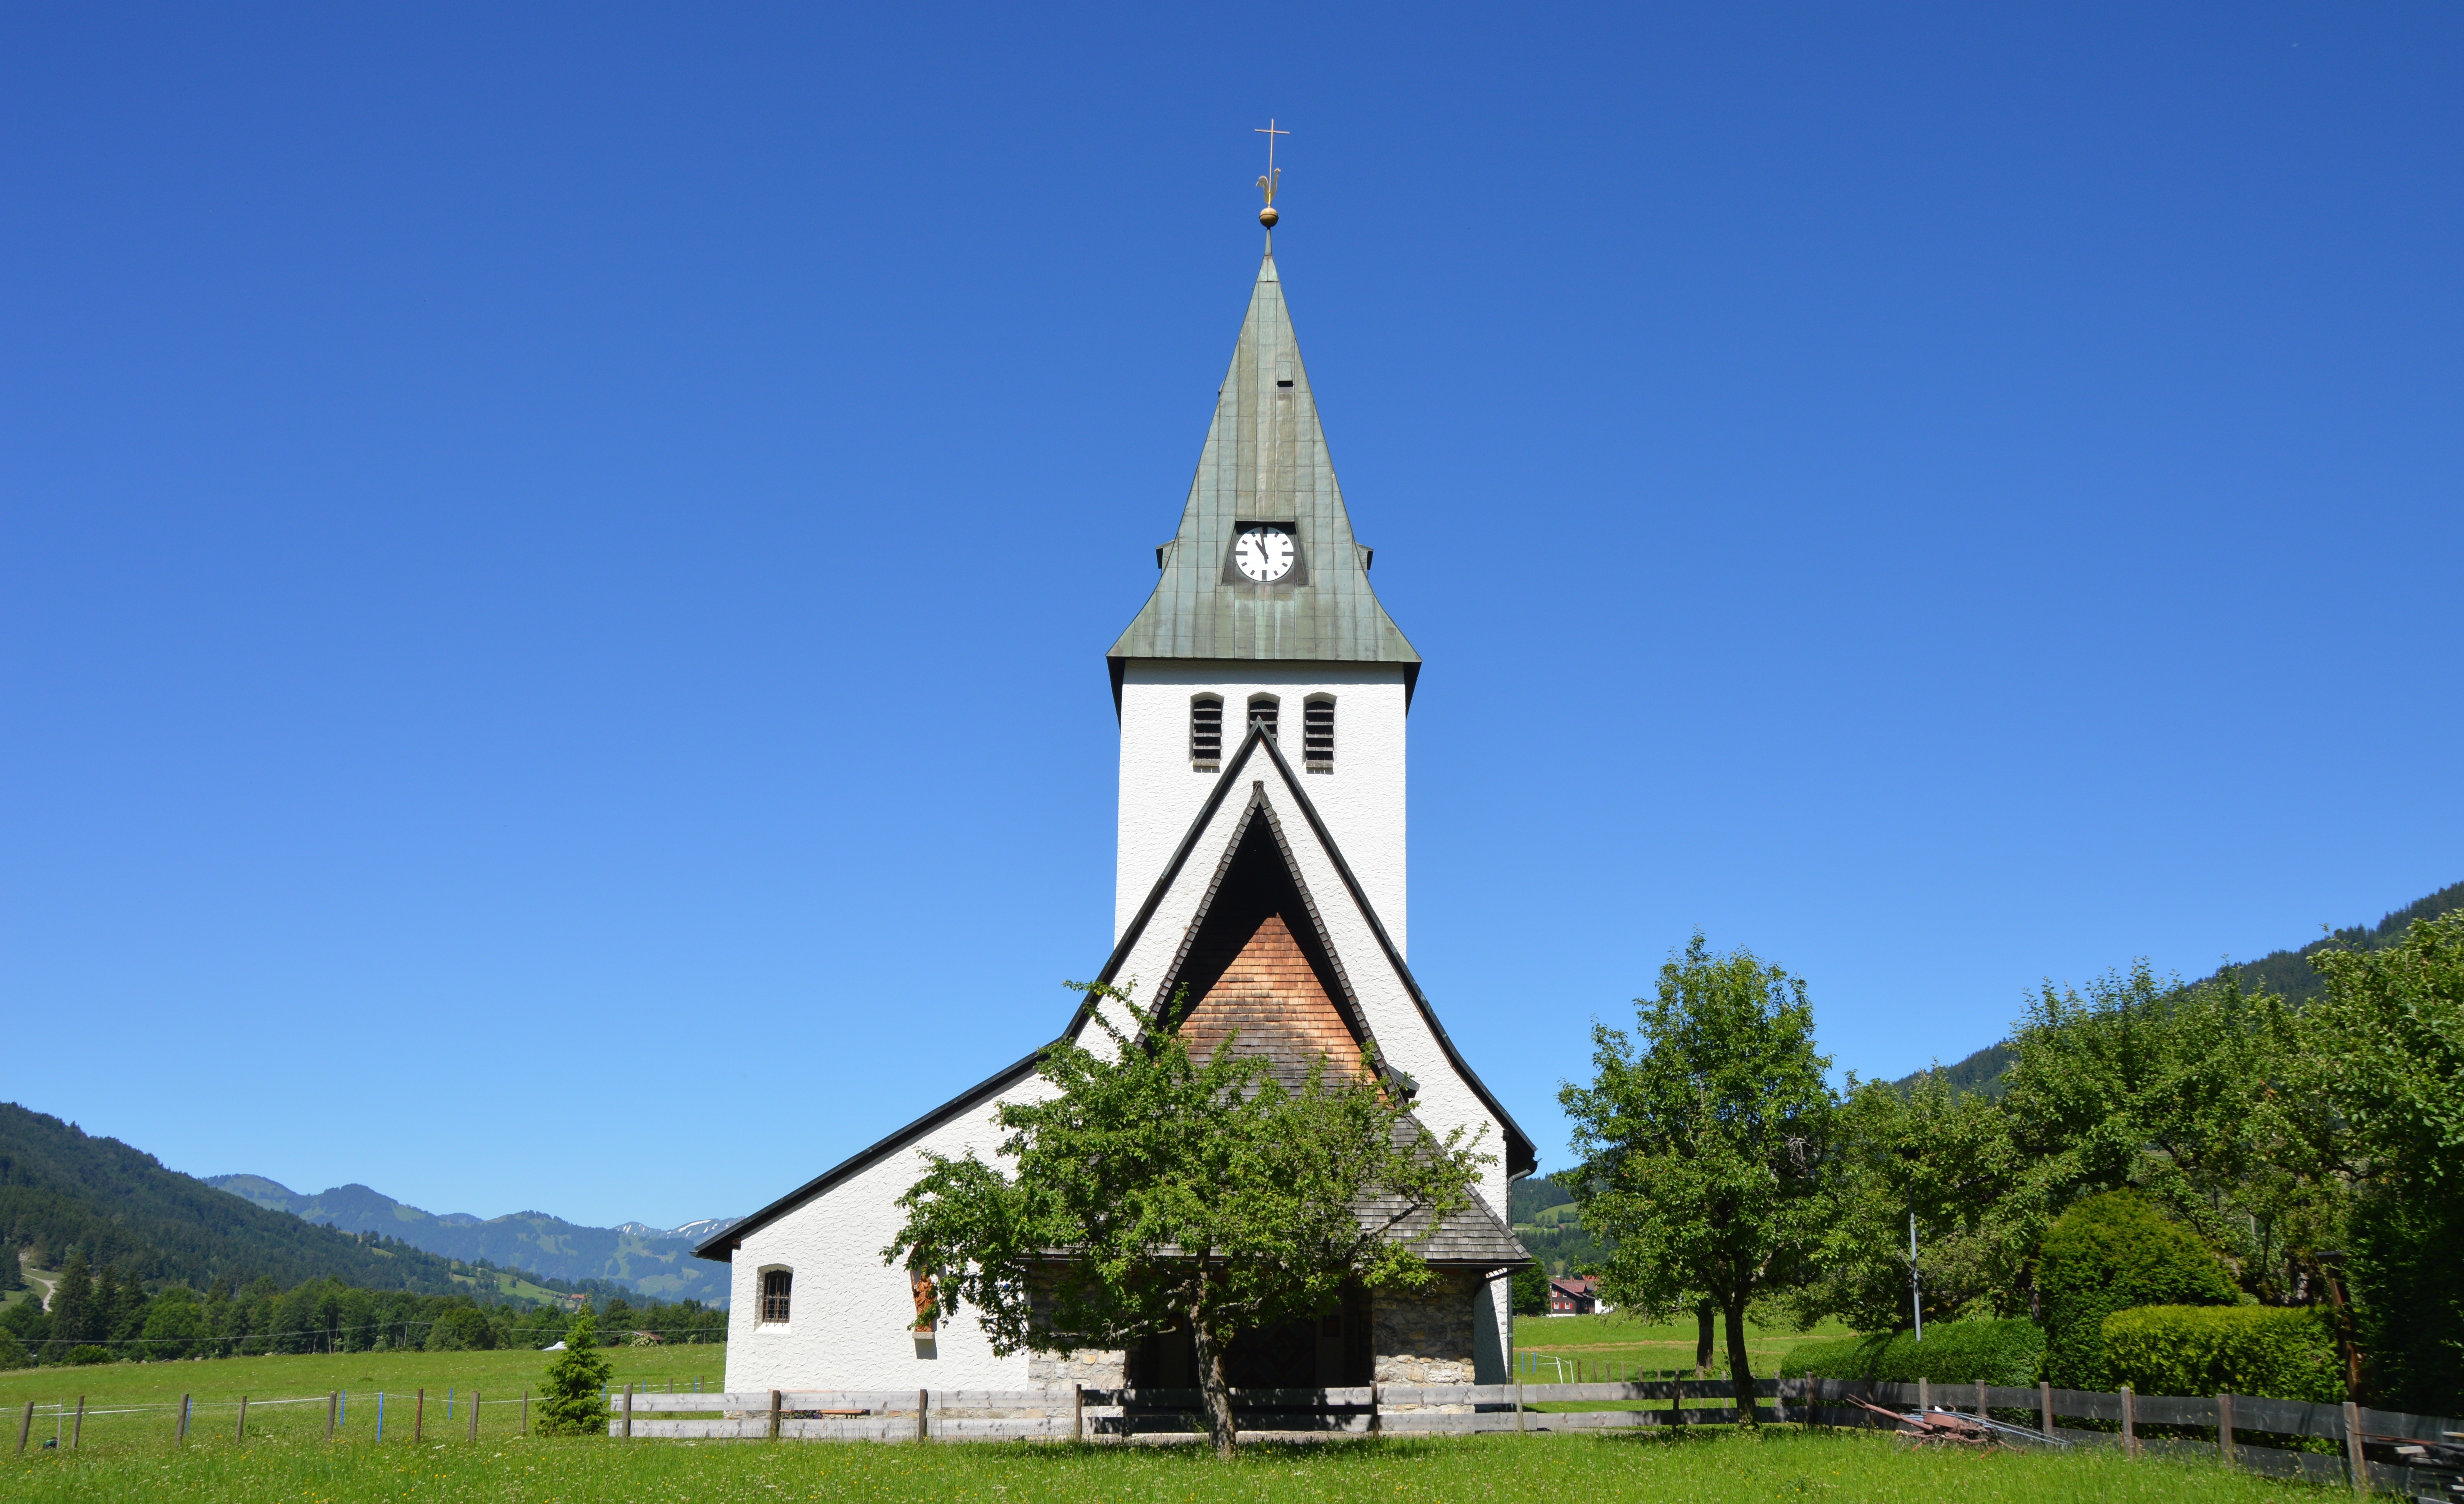 White and grey church near trees under clear blue sky during daylight photo